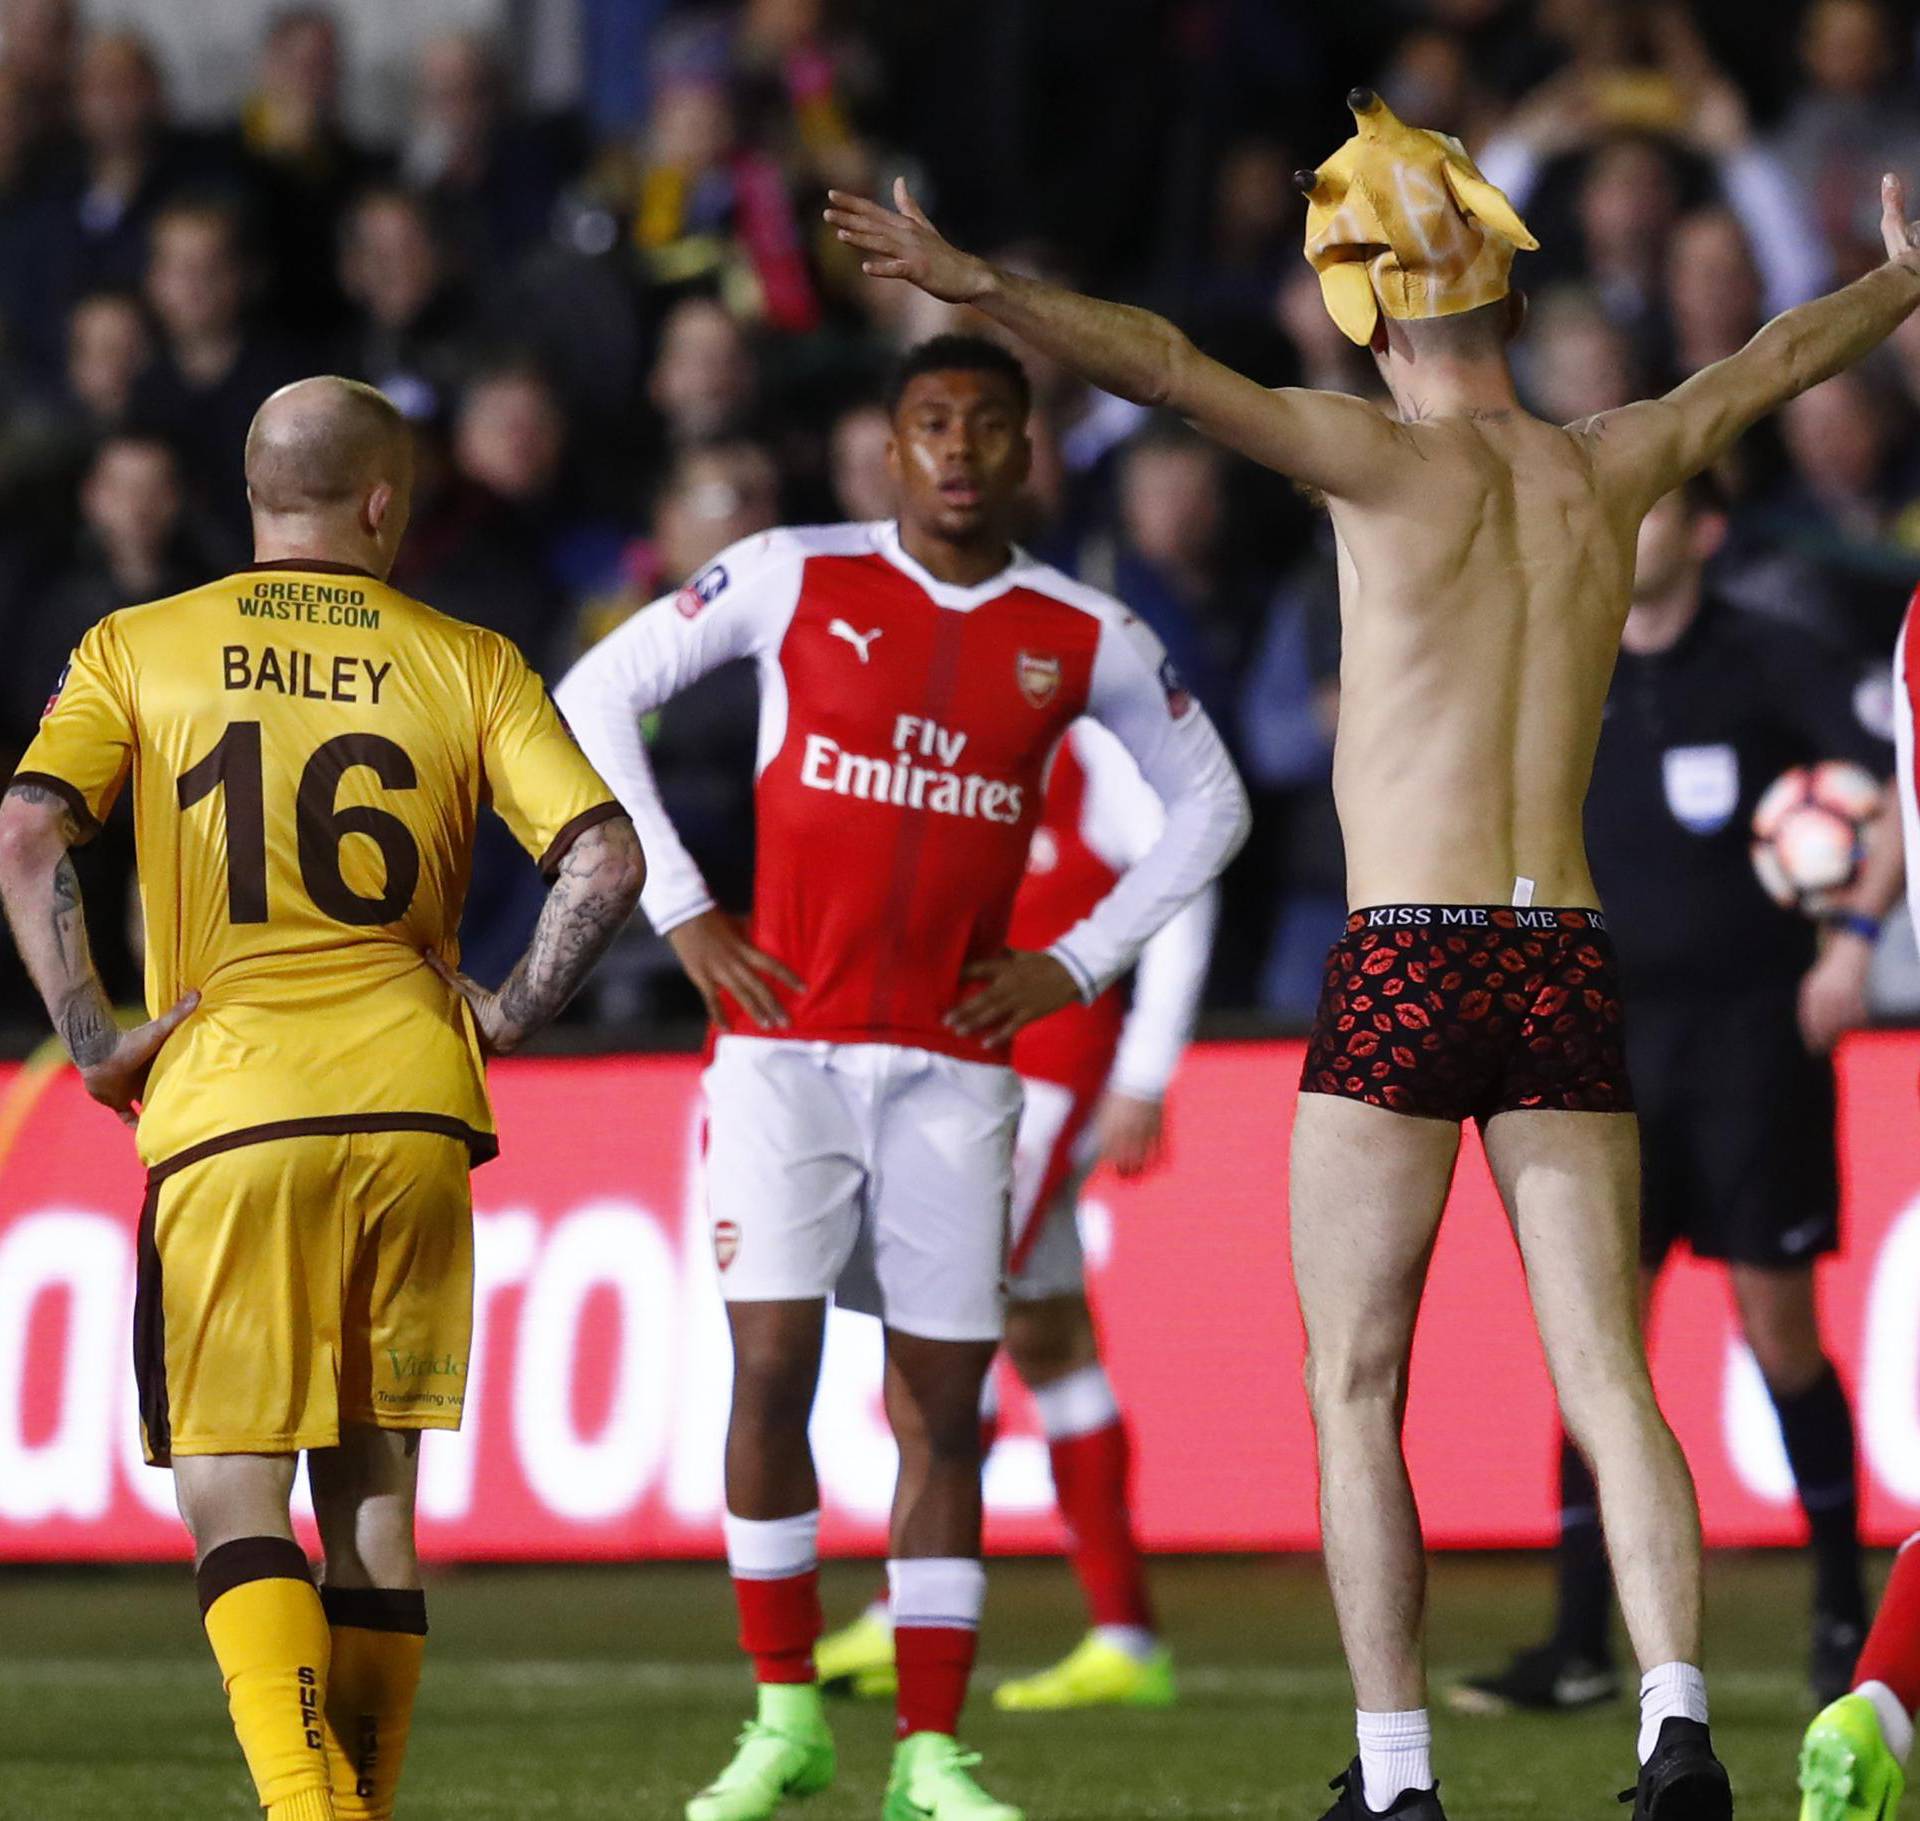 A streaker on the pitch